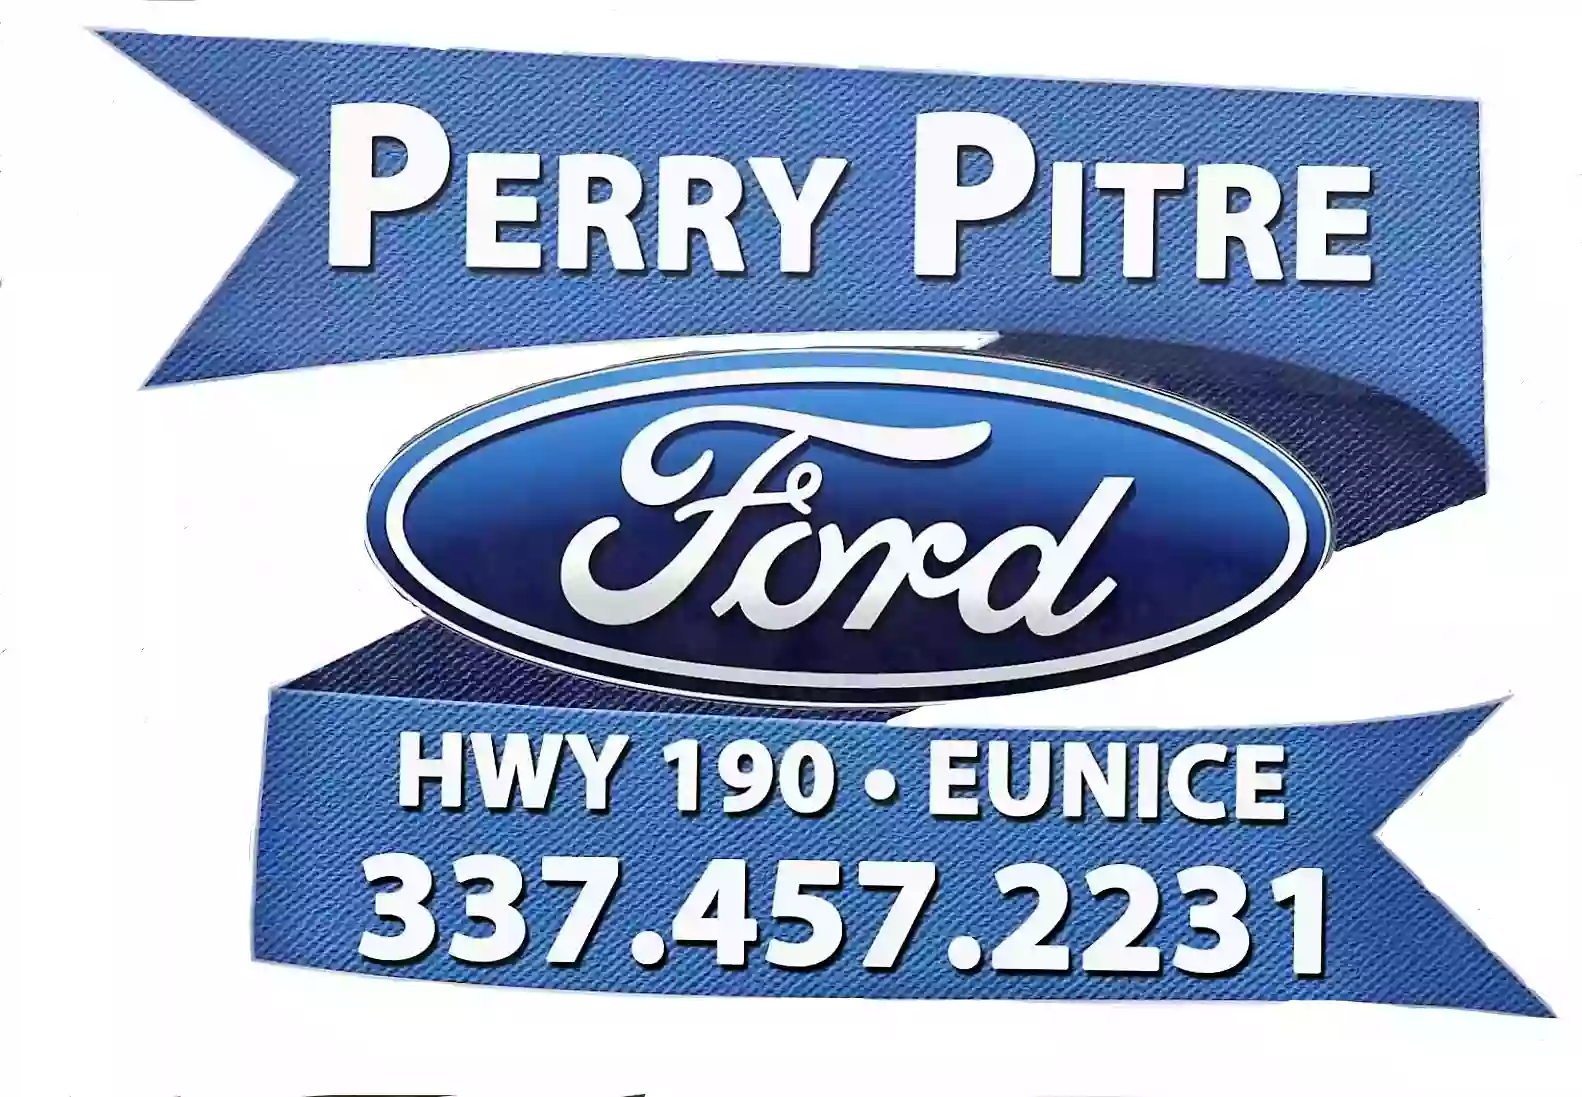 Perry Pitre Ford Co Inc Service